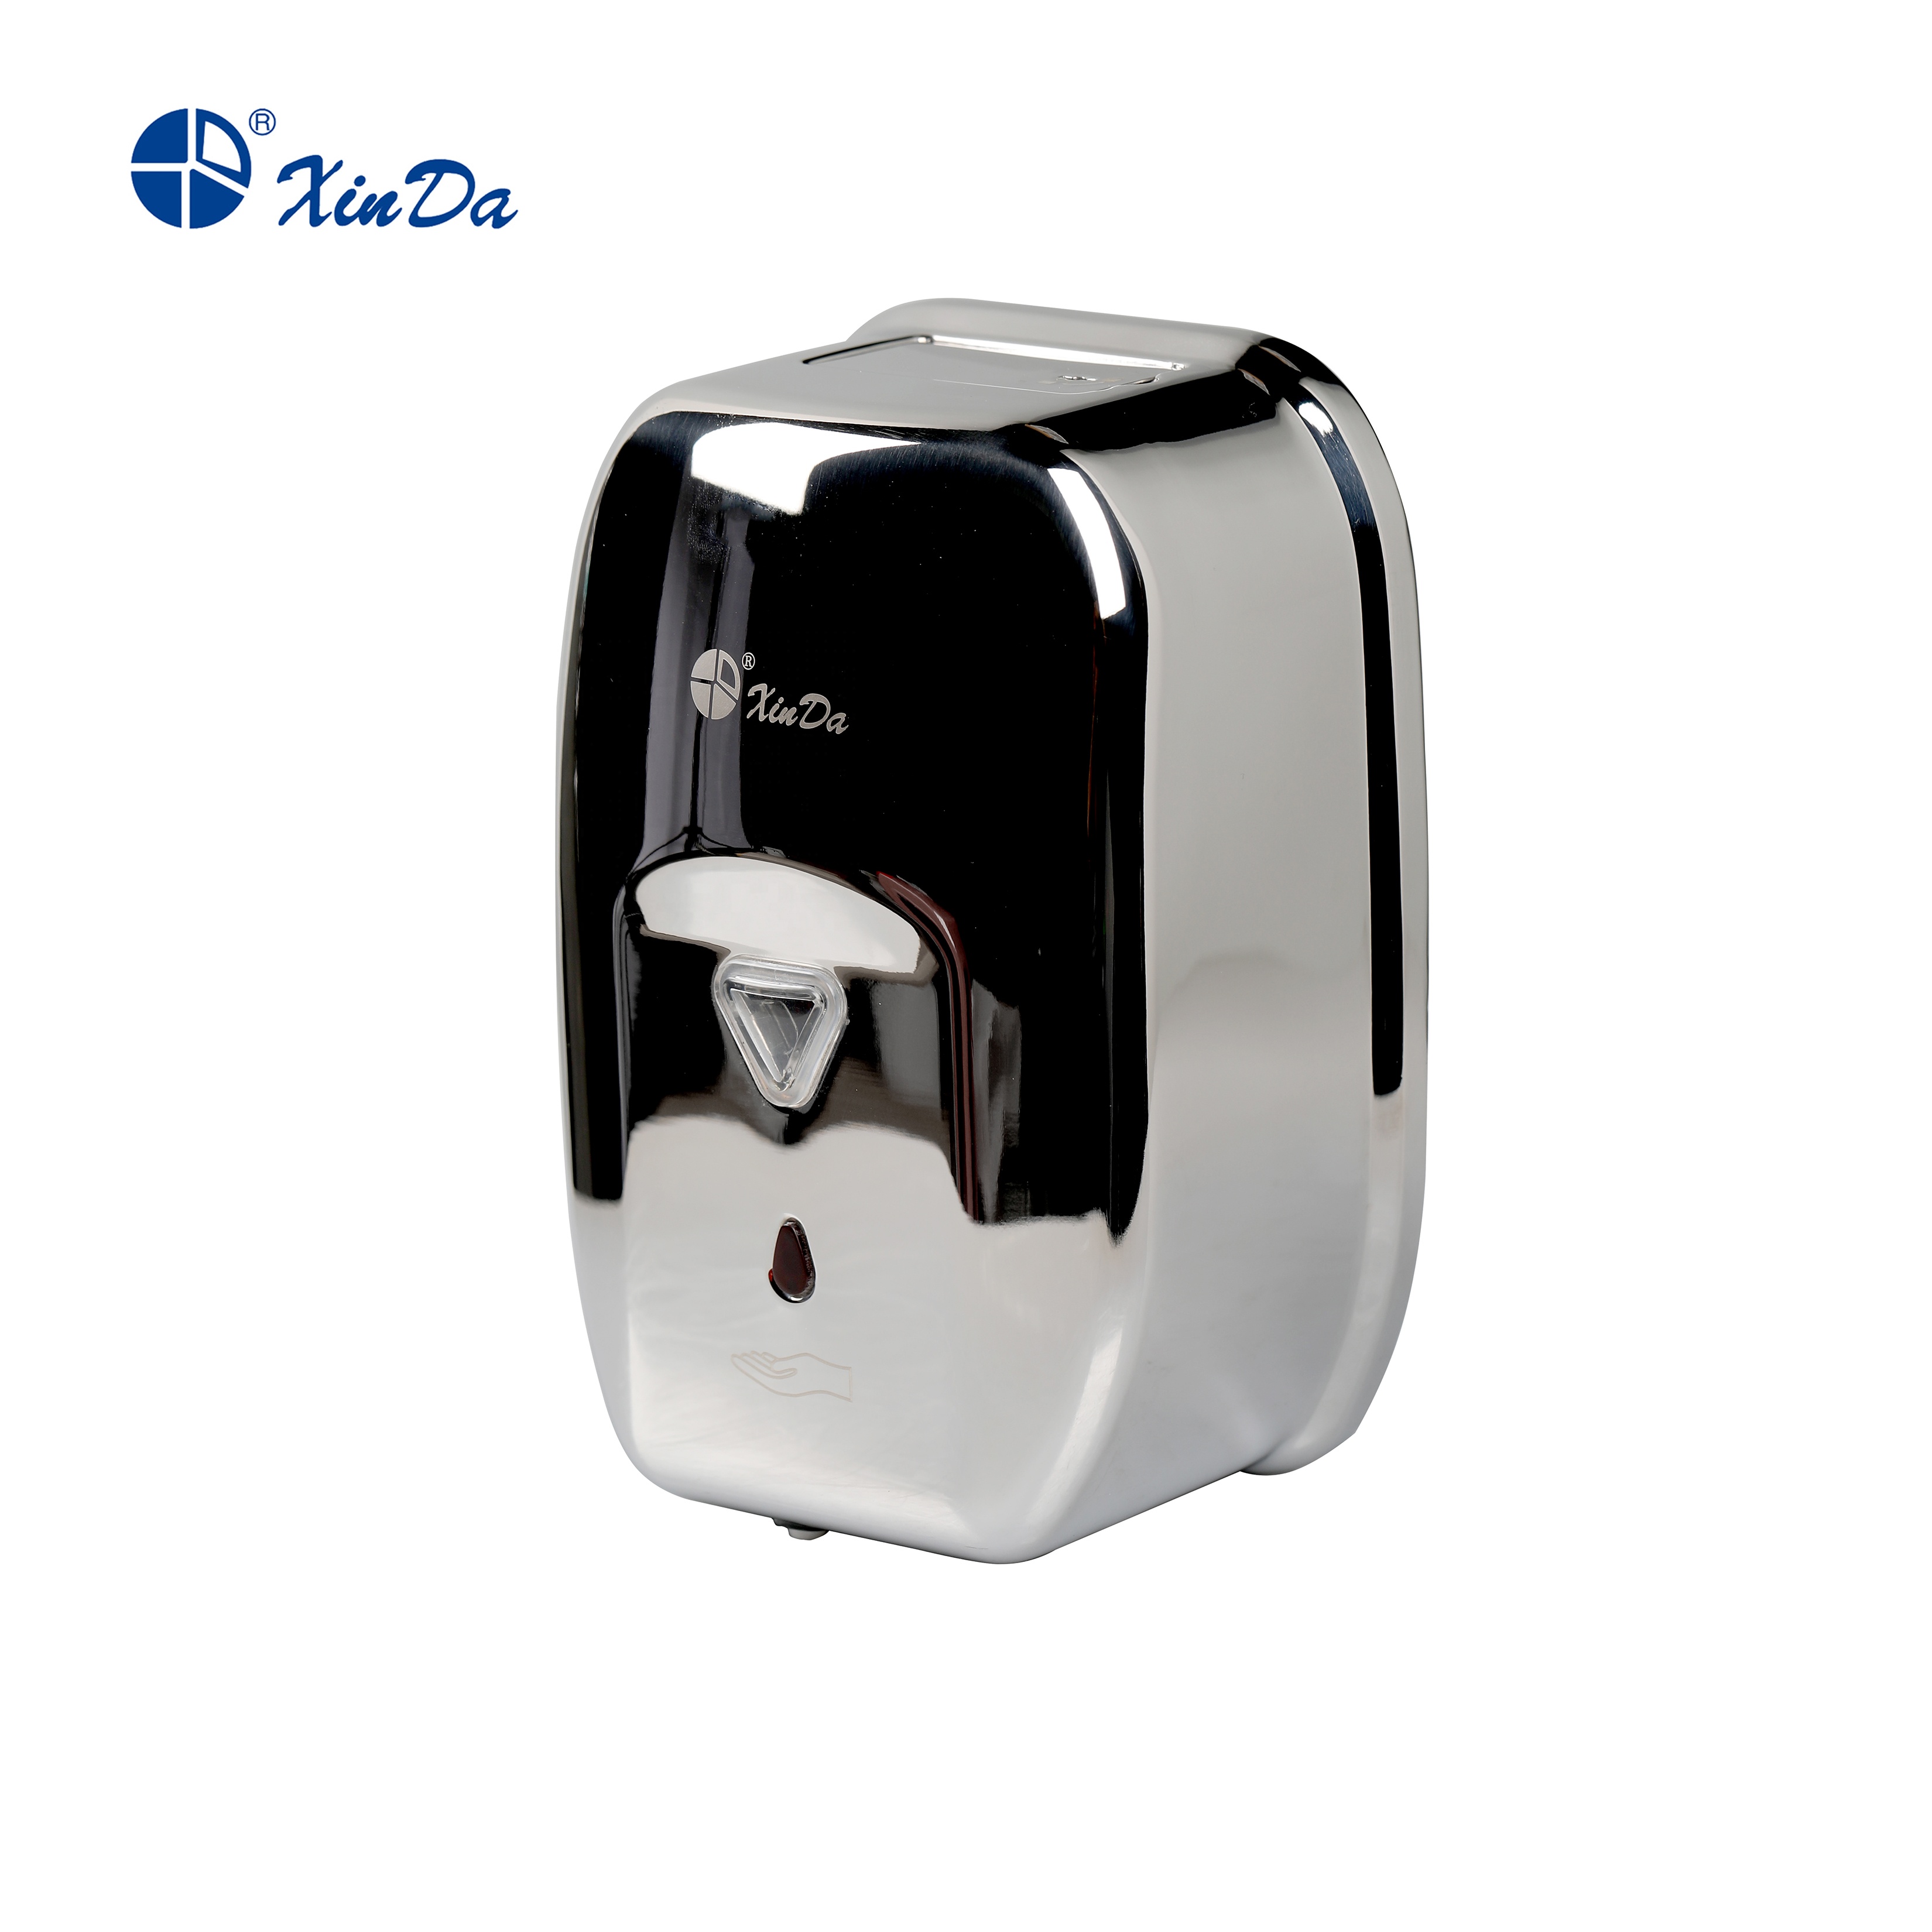 Soap Dispenser ZYQ 120 Metal Automatic Soap Dispenser Sanitize Wall Mounted with Key-Locked Protection